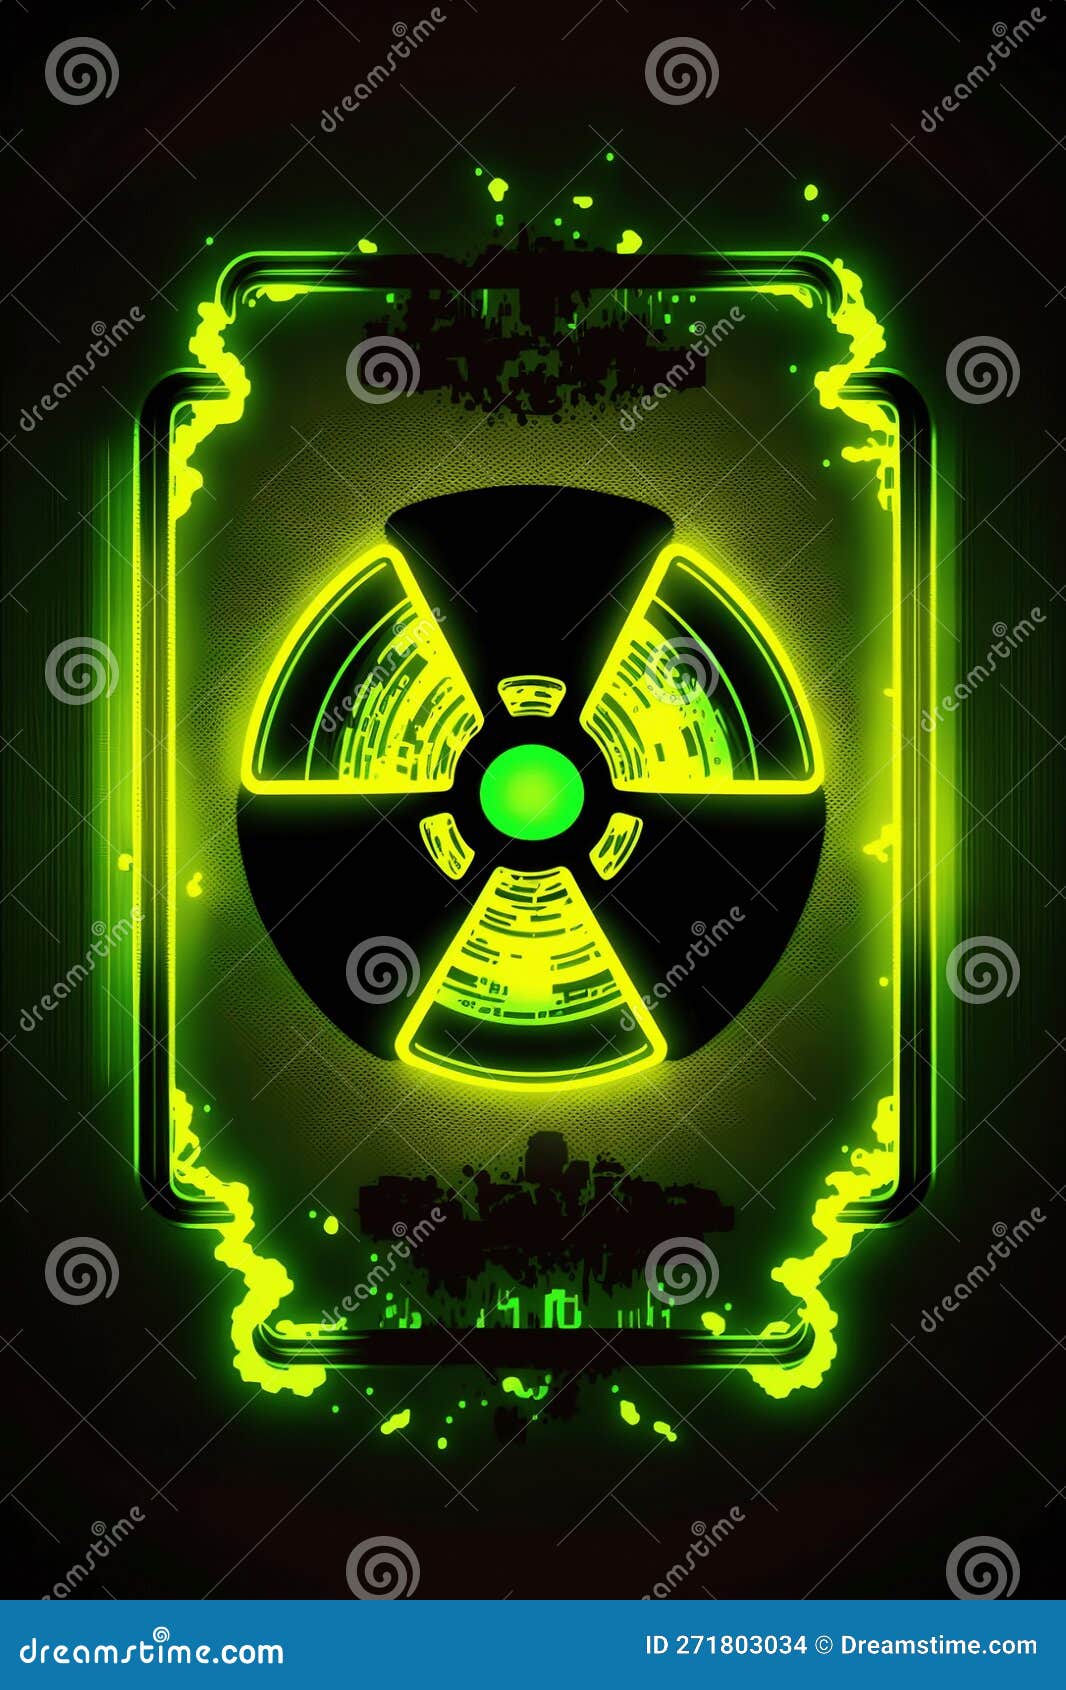 Download Radioactive wallpapers for mobile phone free Radioactive HD  pictures